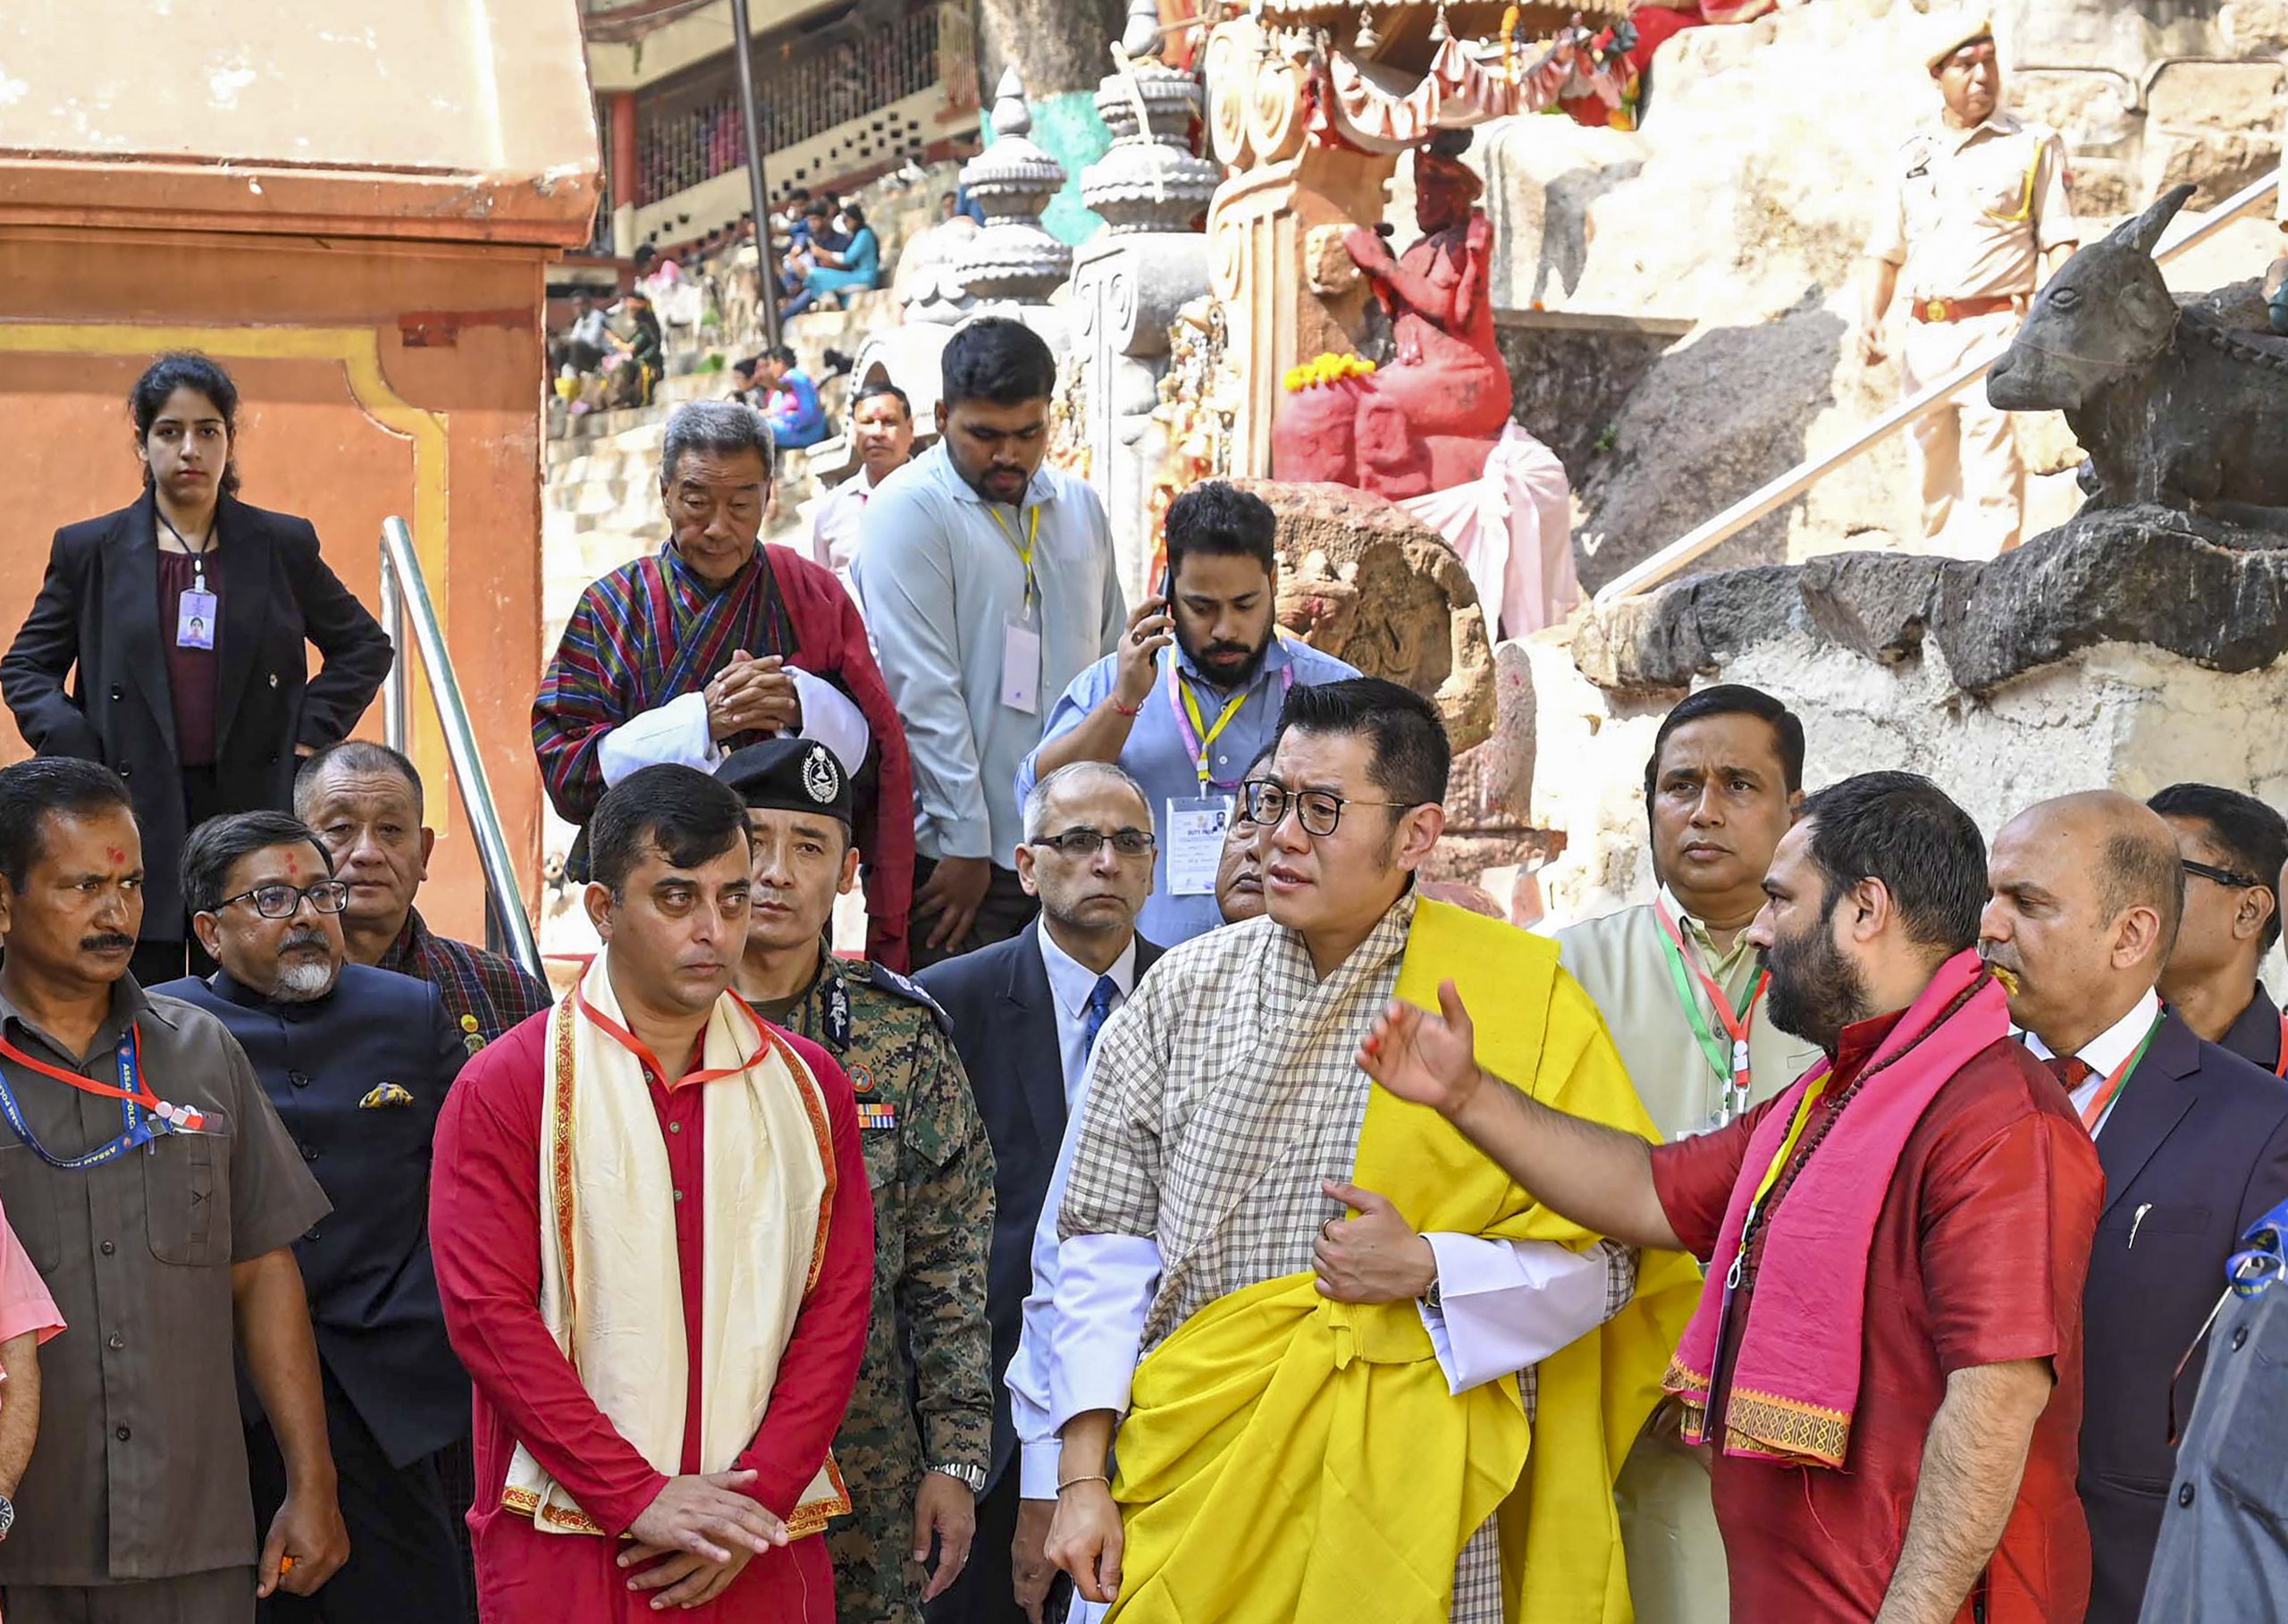 Bhutan’s King initiates a three-day visit to Assam and offers prayers at the Kamakhya Temple